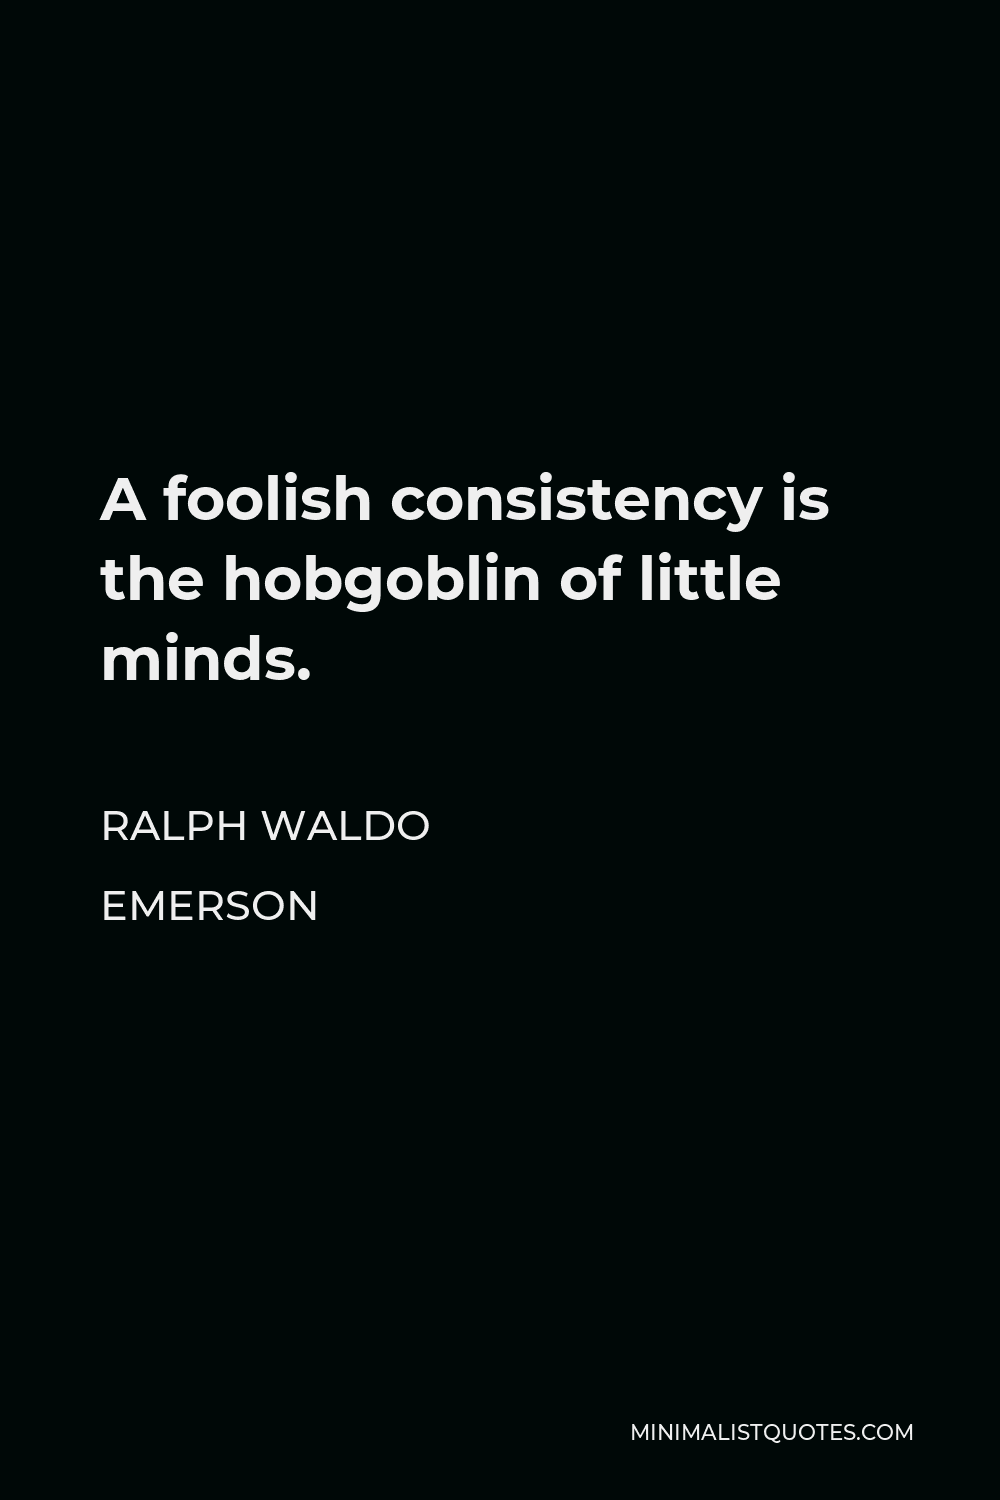 Ralph Waldo Emerson Quote - A foolish consistency is the hobgoblin of little minds.